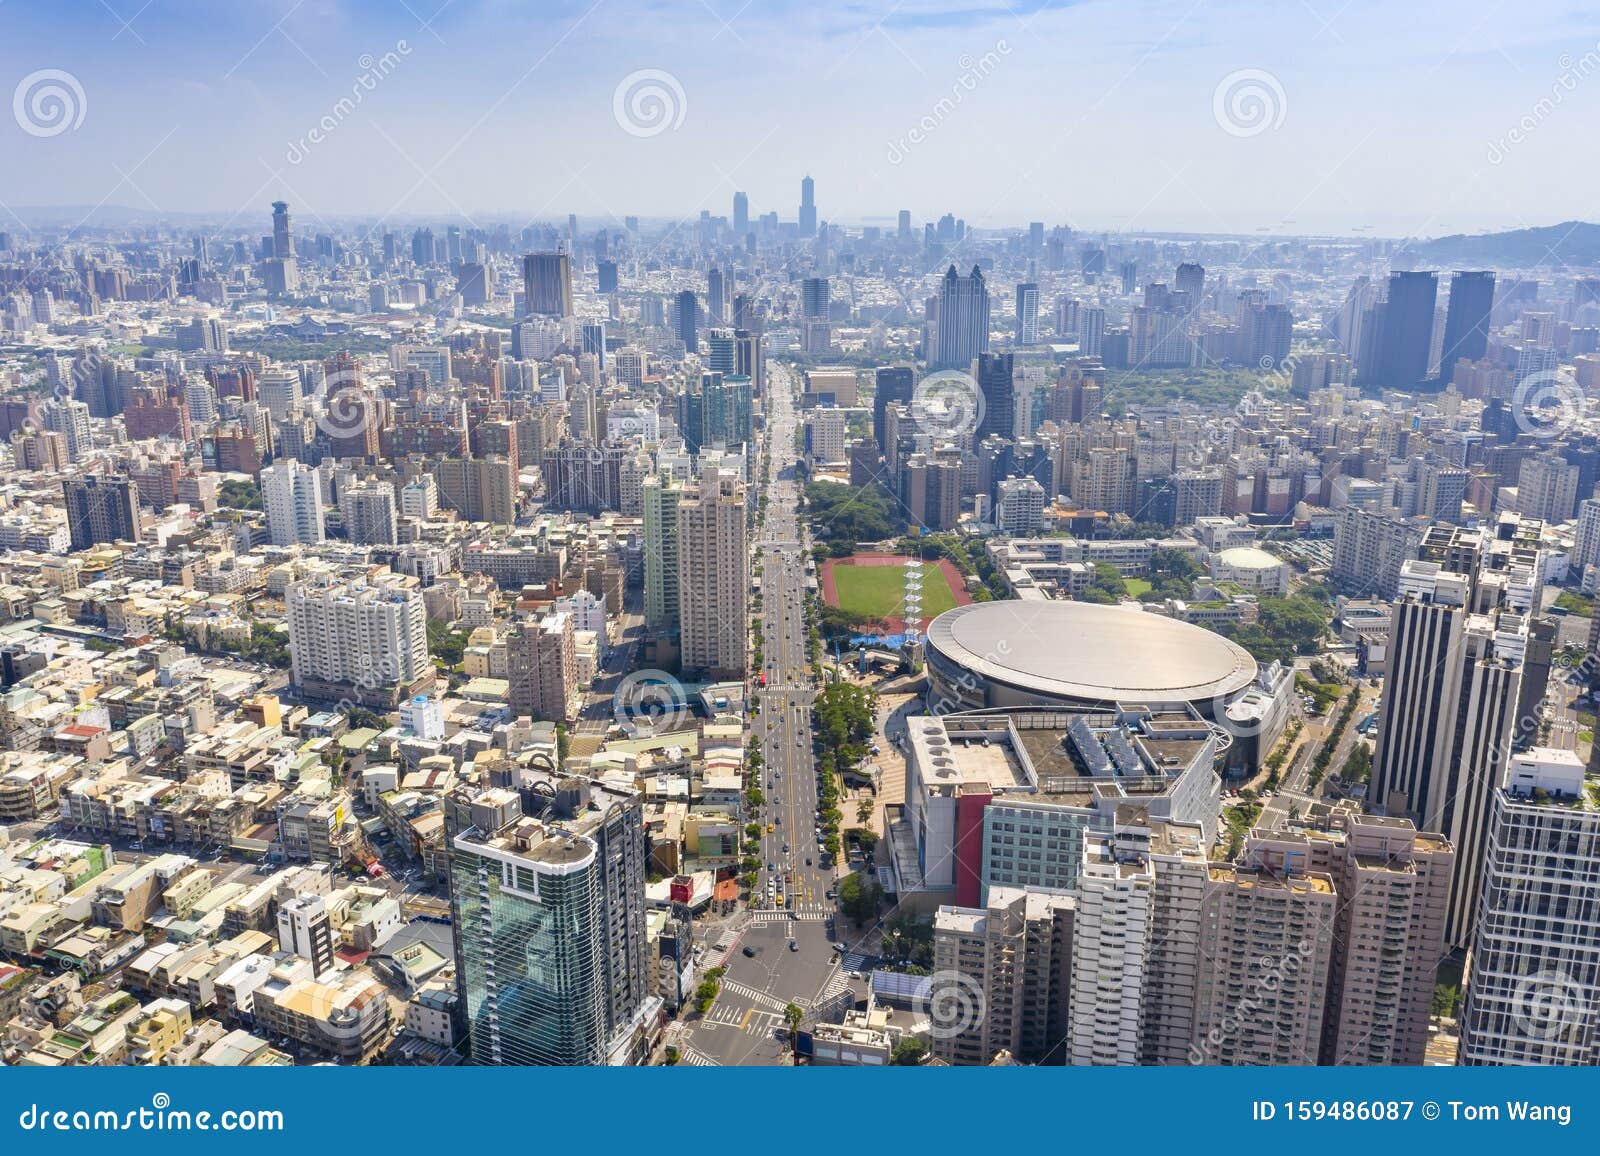 aerial view of kaohsiung arena and cityscapes.